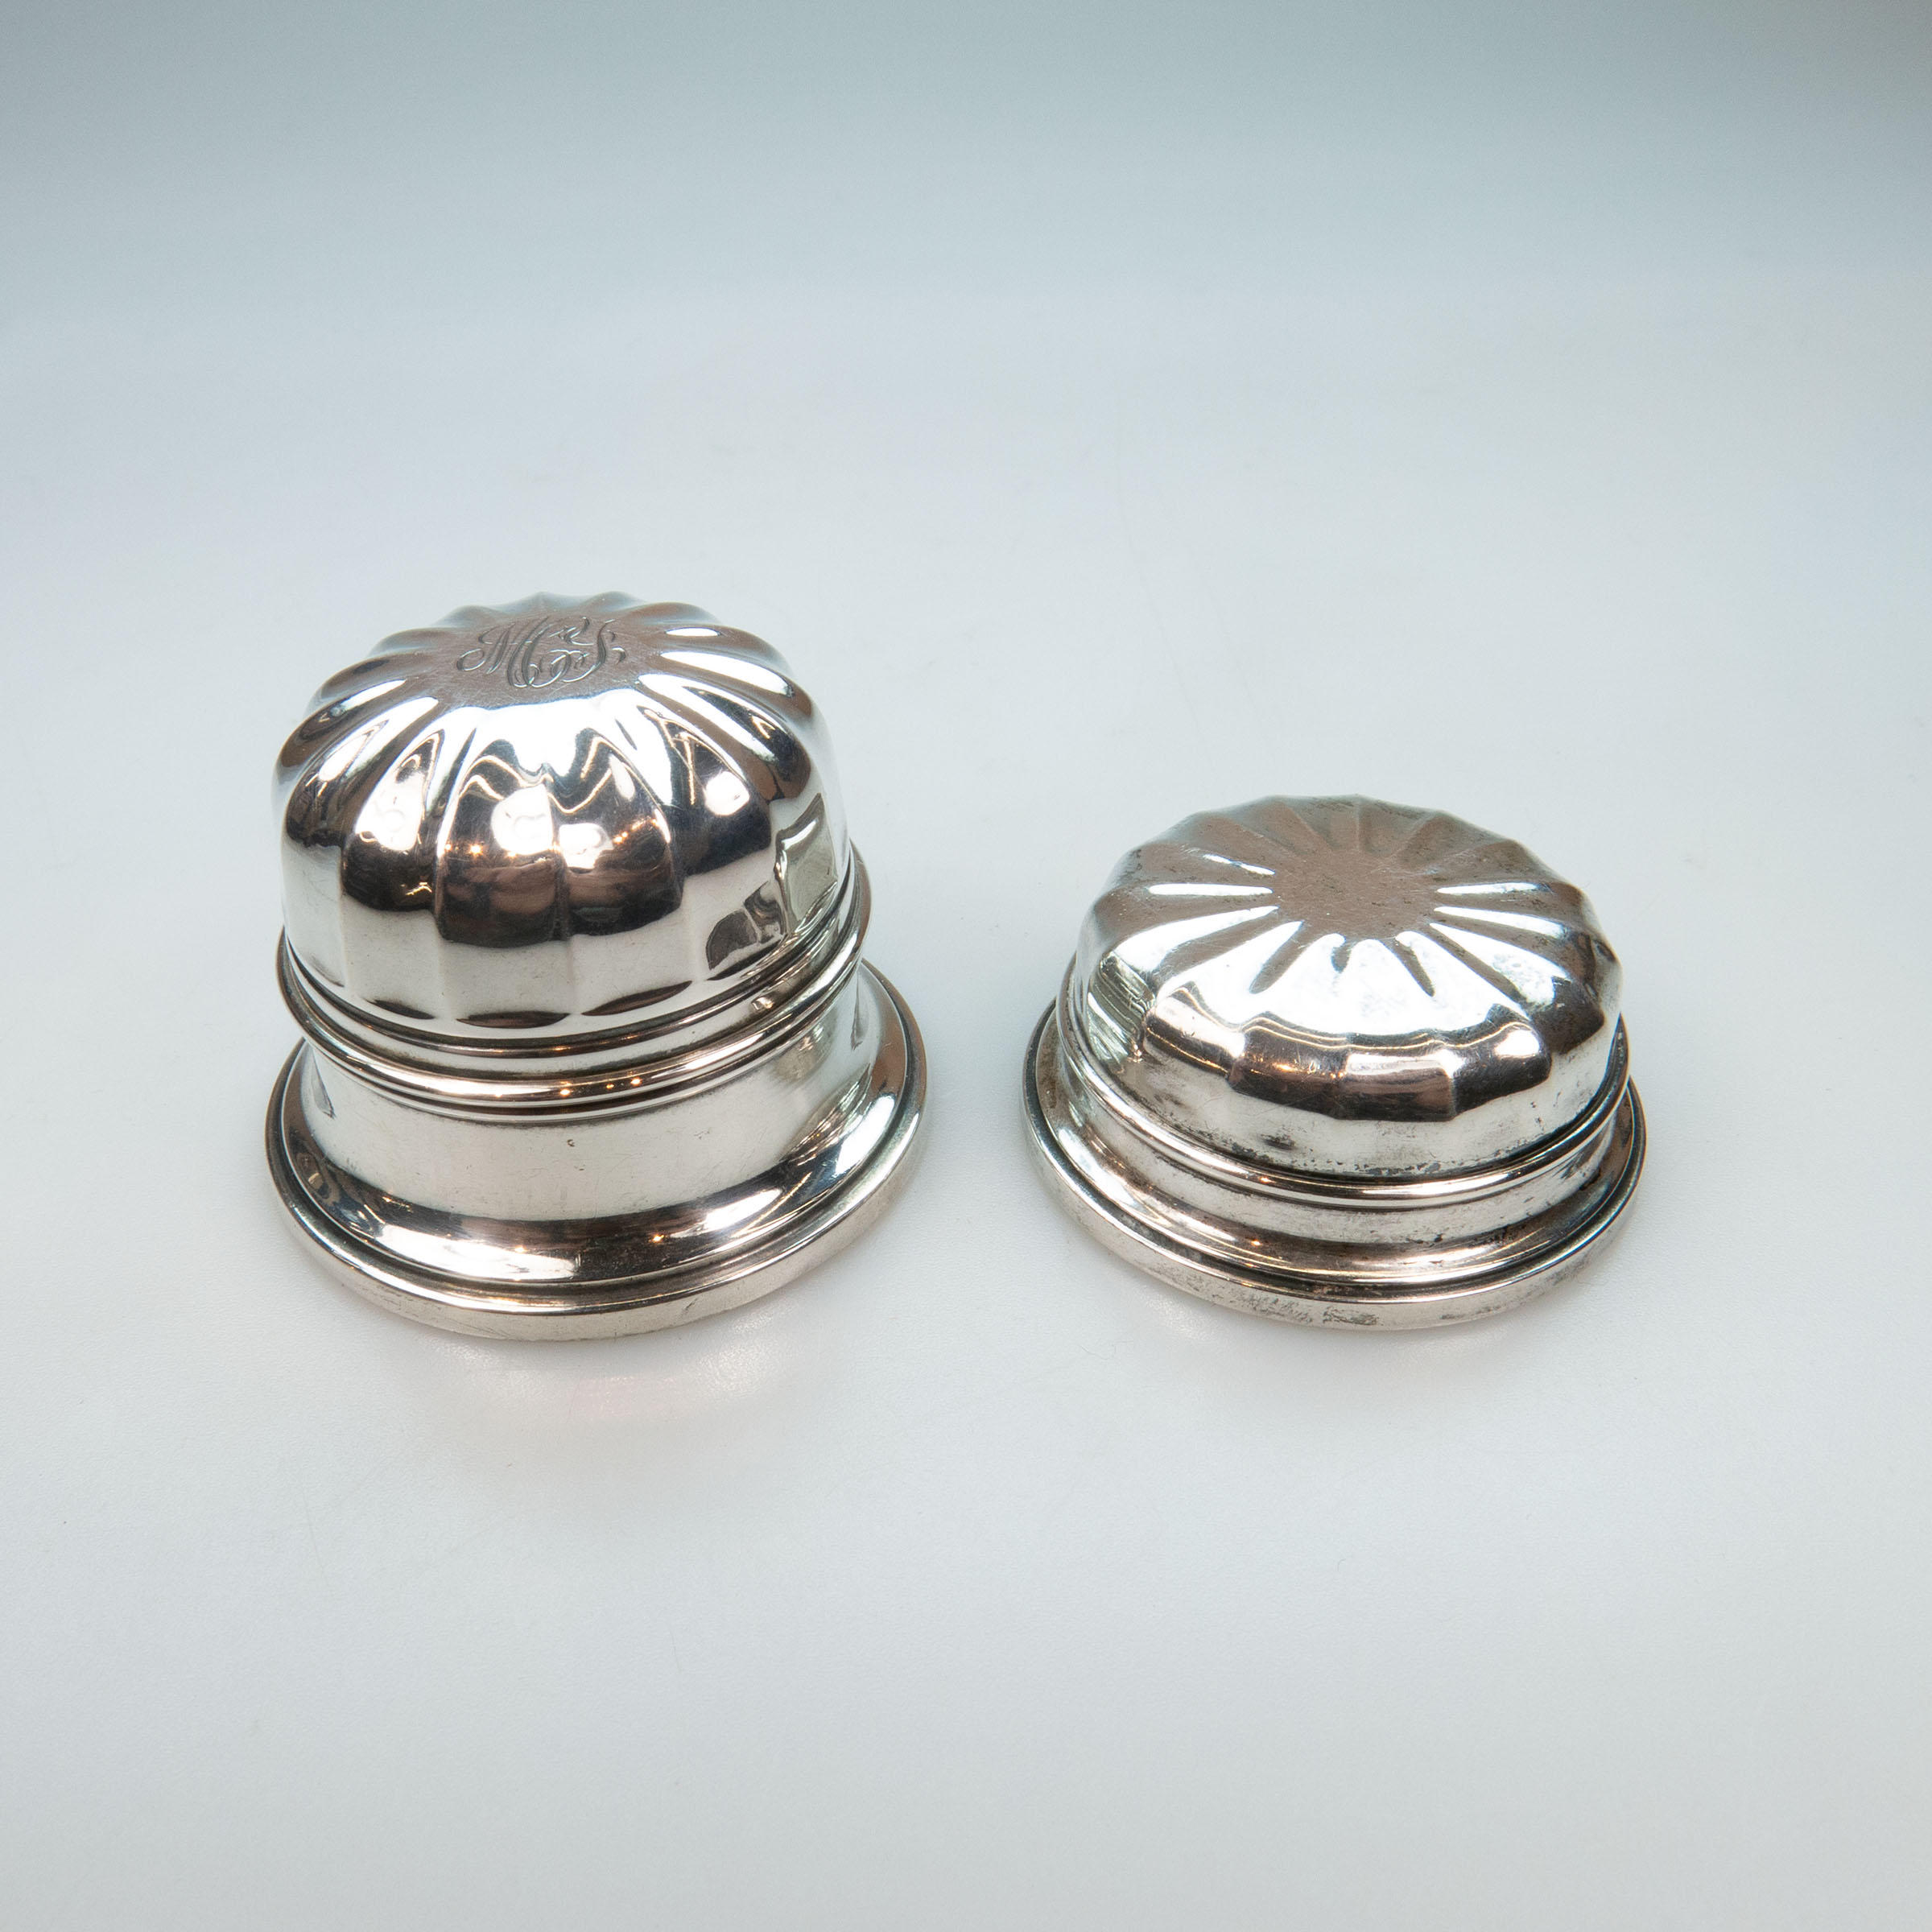 2 Birks Sterling Silver Ring Boxes